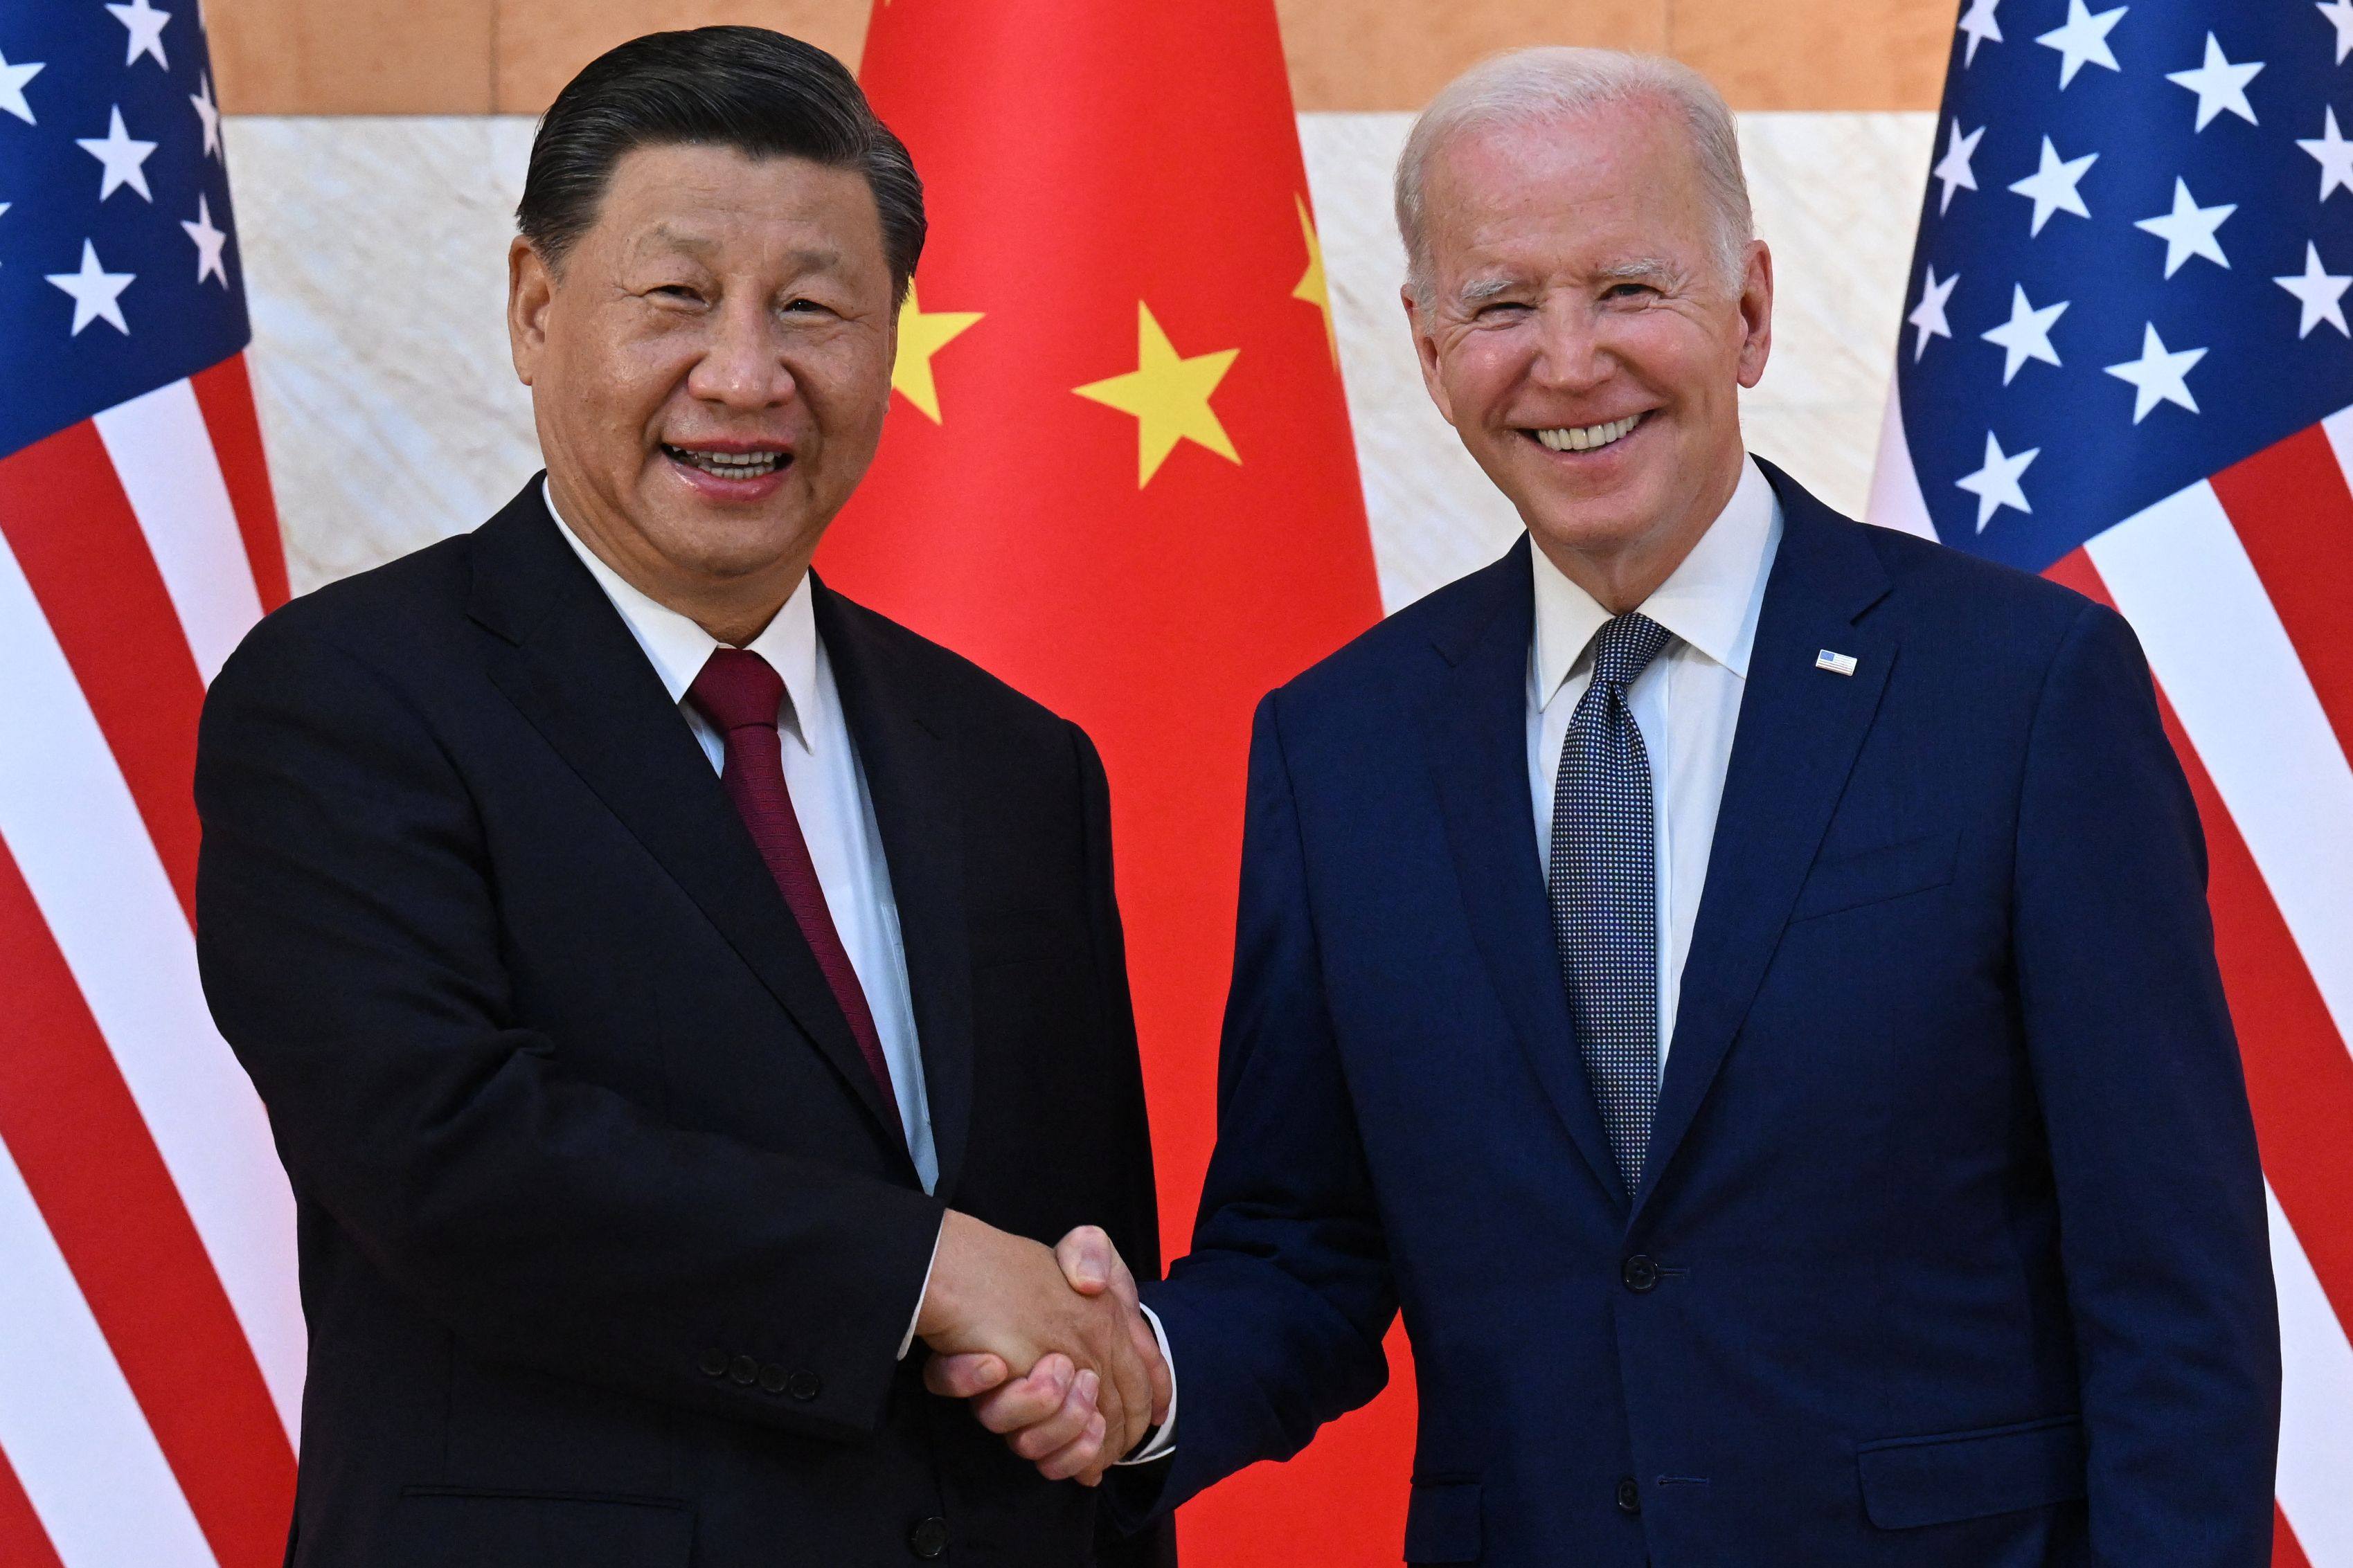 Xi Jinping and Joe Biden last met face to face at the G20 summit in Bali last year. Photo: AFP